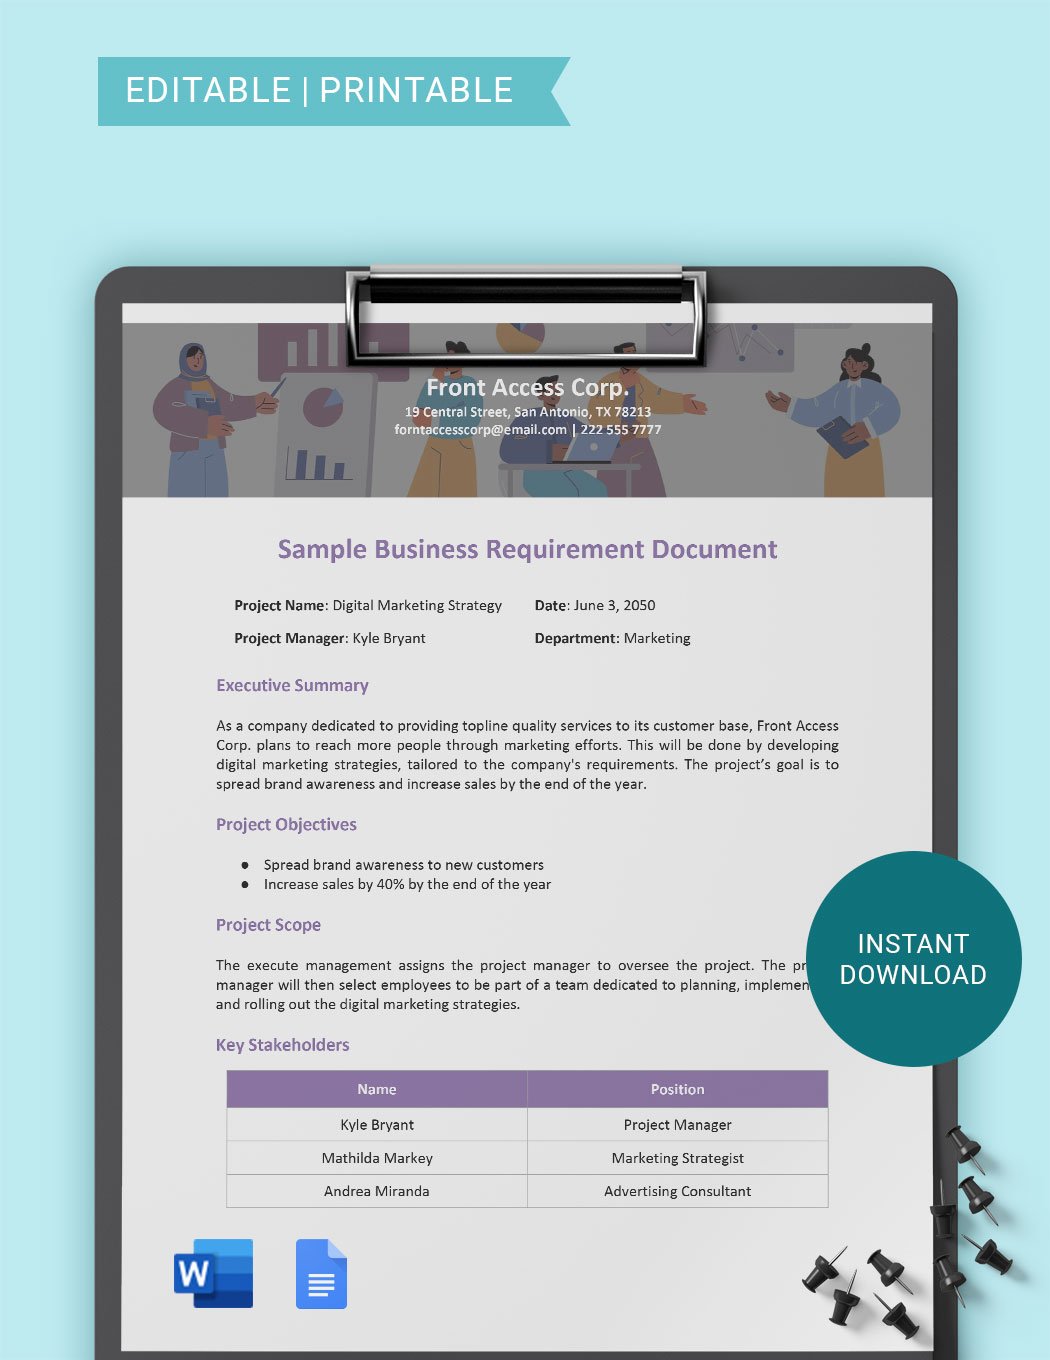 Free Sample Business Requirements Document Template in Word, Google Docs